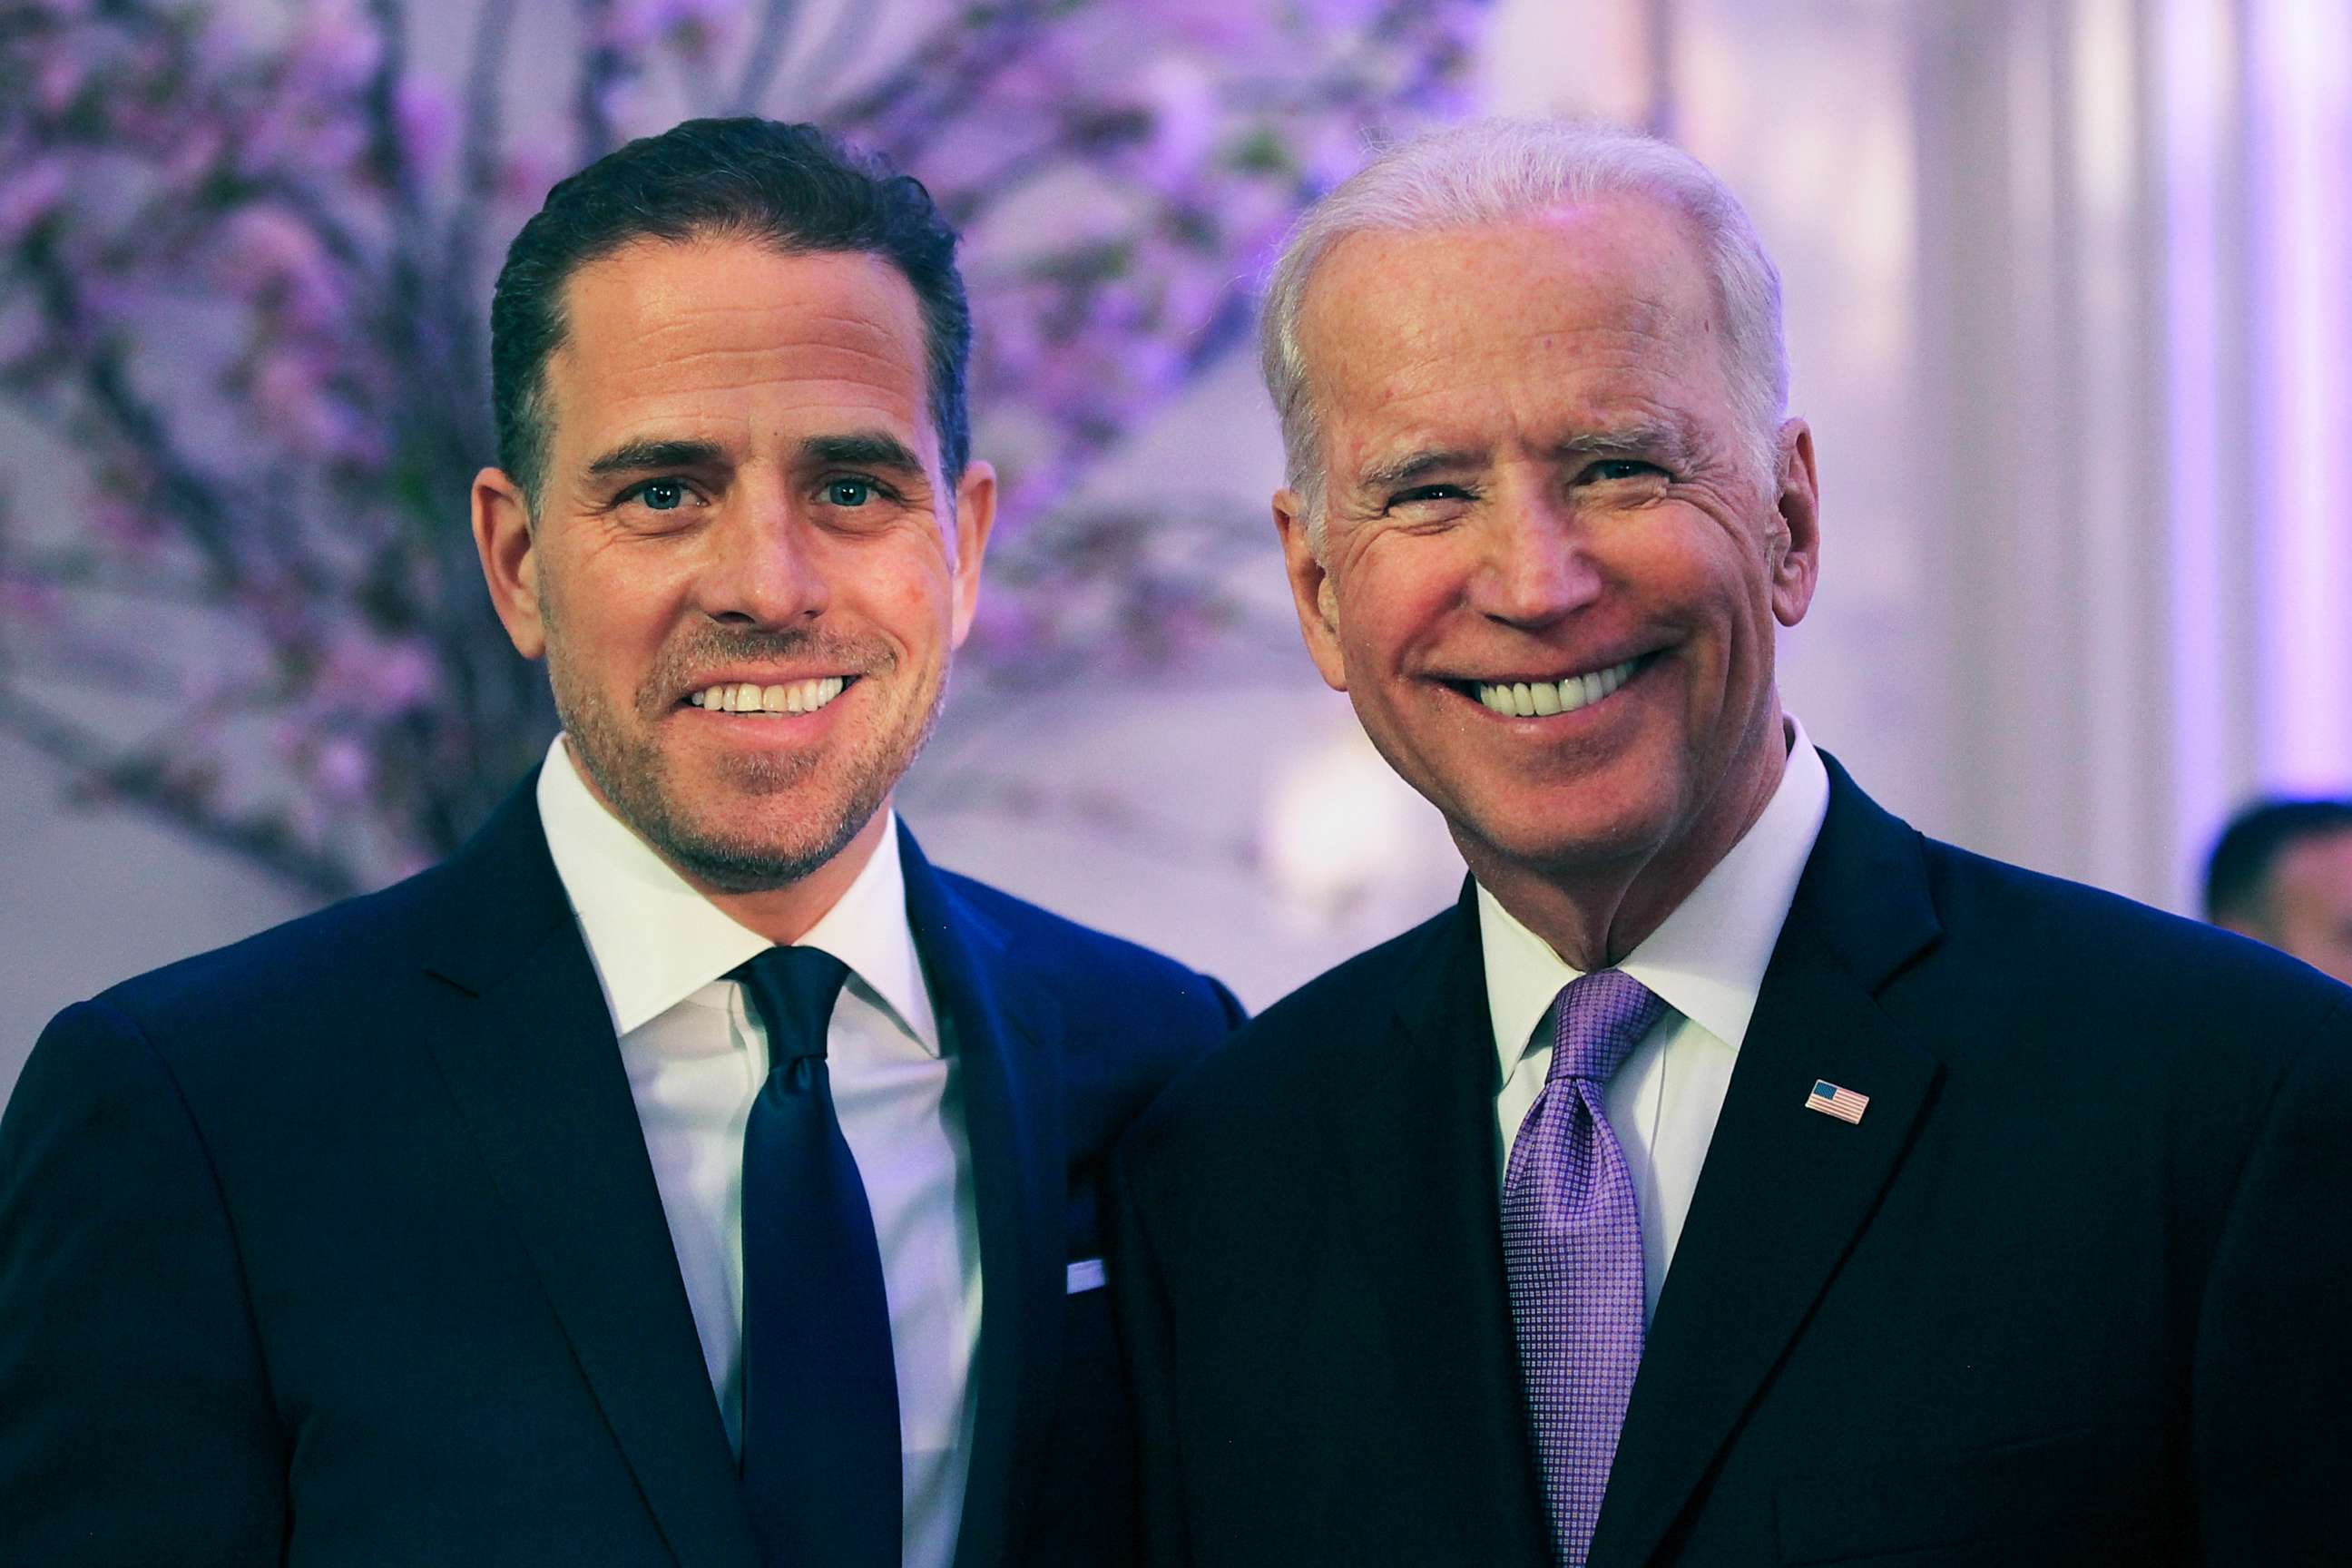 PHOTO: Hunter Biden and his father, then Vice President Joe Biden, attend the World Food Program USA's Annual McGovern-Dole Leadership Award Ceremony at Organization of American States, April 12, 2016, in Washington, D.C.